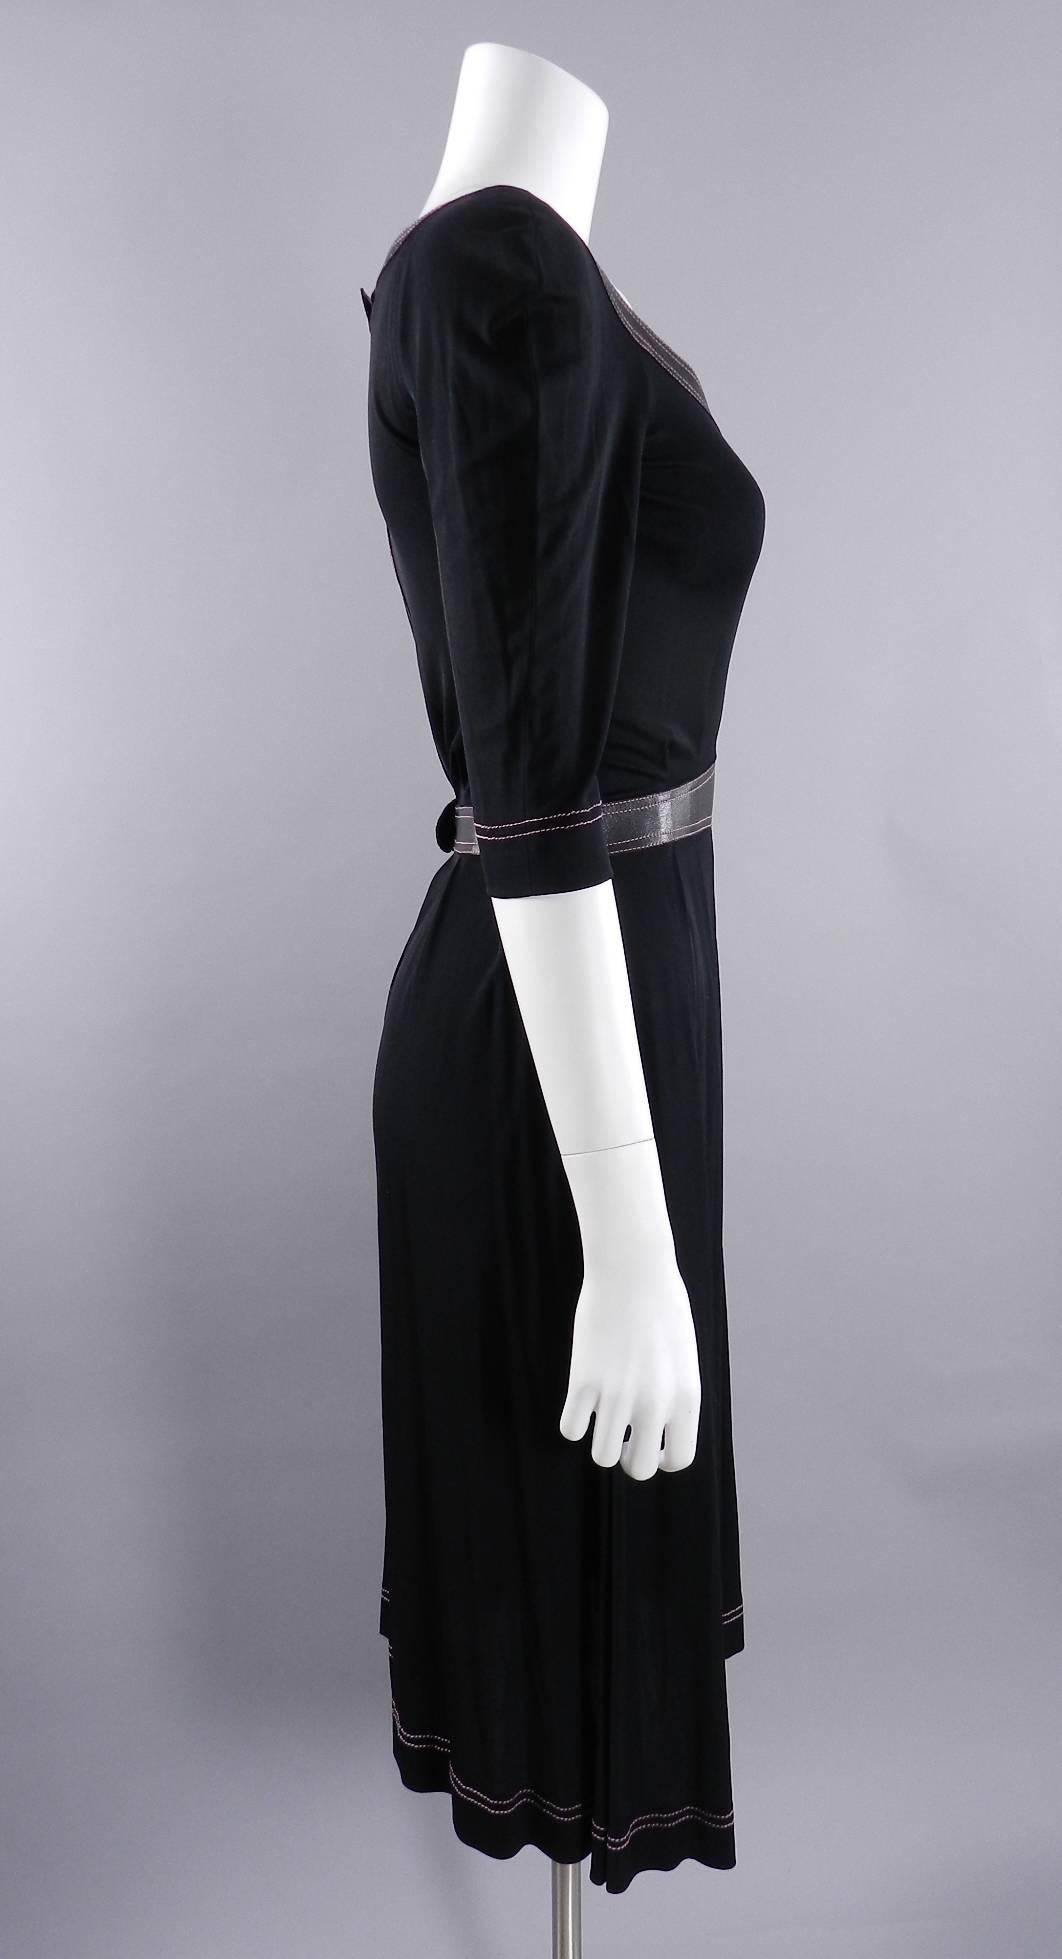 Vintage 1970's Jean Muir black slinky jersey dress with black leather trim and pink top stitching. 100% rayon matte jersey. Centre metal back zipper, no shoulder seams, hidden hip pockets. Overall approximate modern size USA 6/8. To fit 34